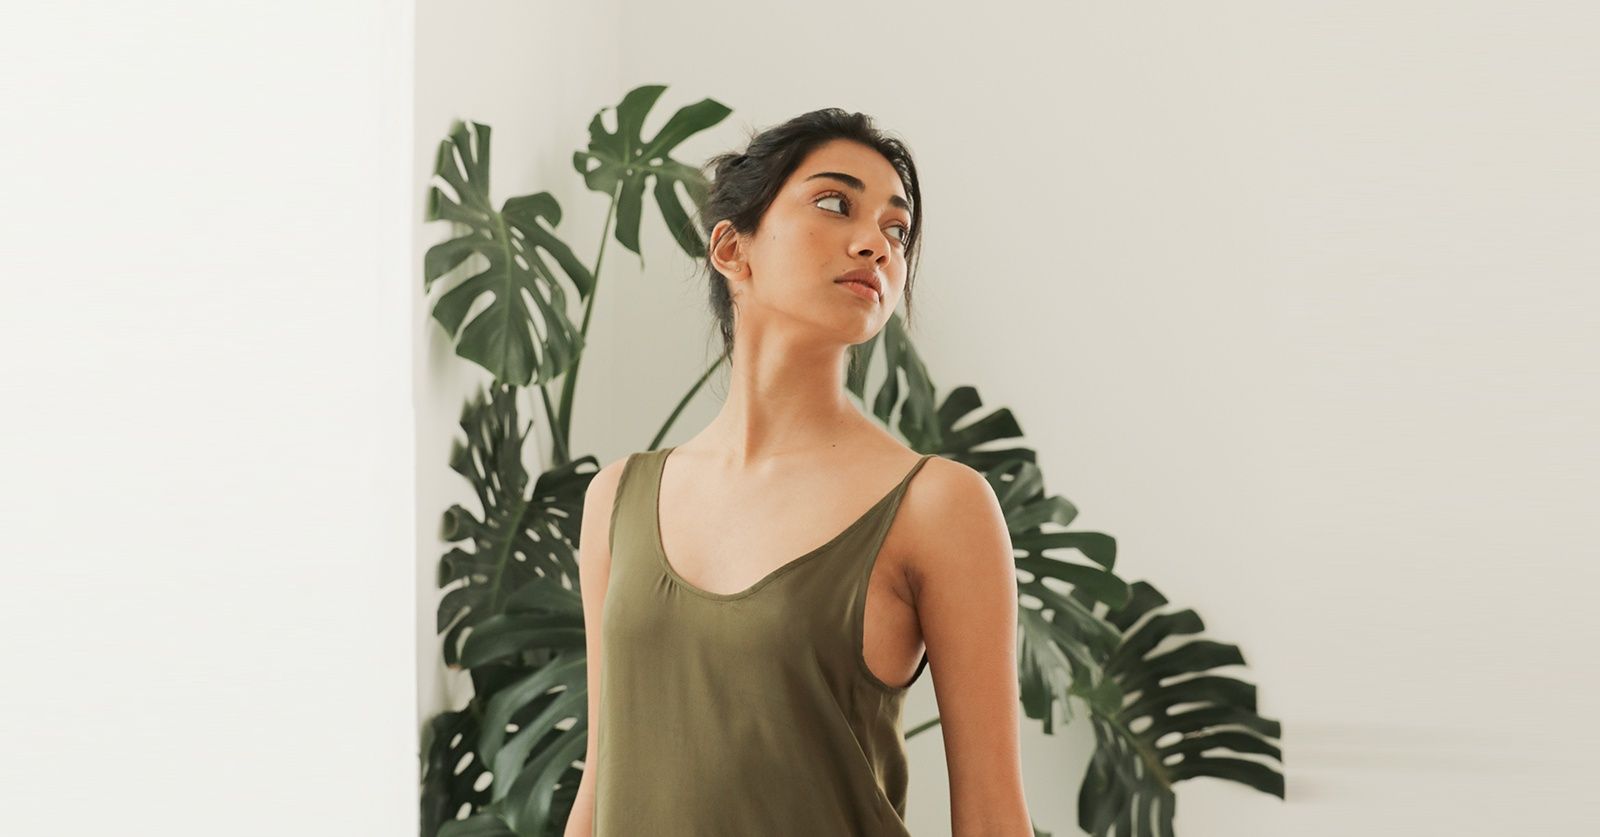 These local slow fashion brands encourage you to shop better, not more